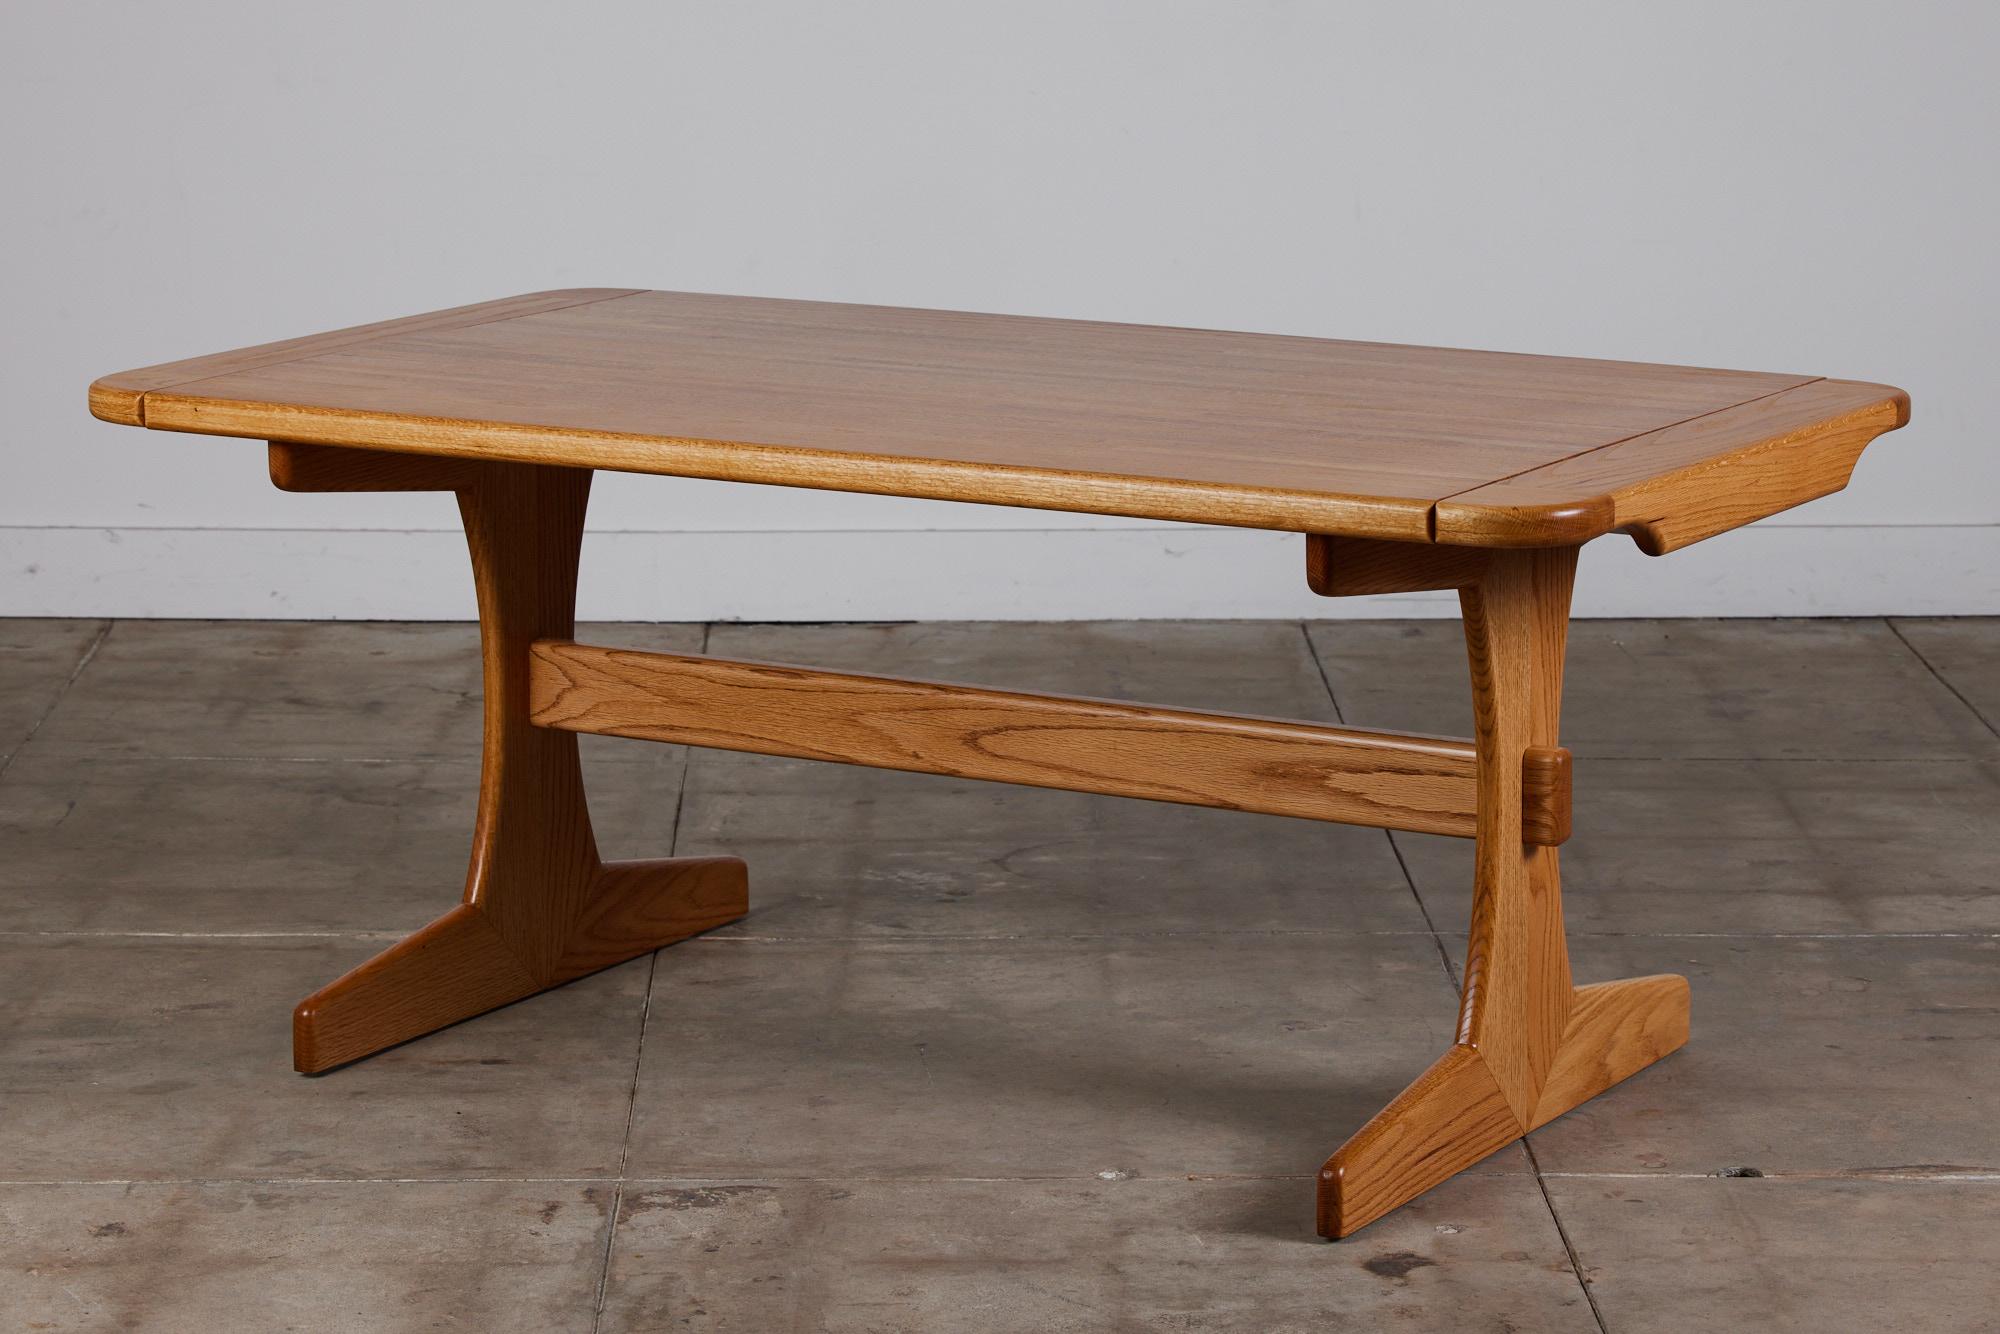 Lou Hodges oak dining table for California Design Group, circa 1970s, USA. This table features a solid oak table top and trestle base. The table comes with two 13